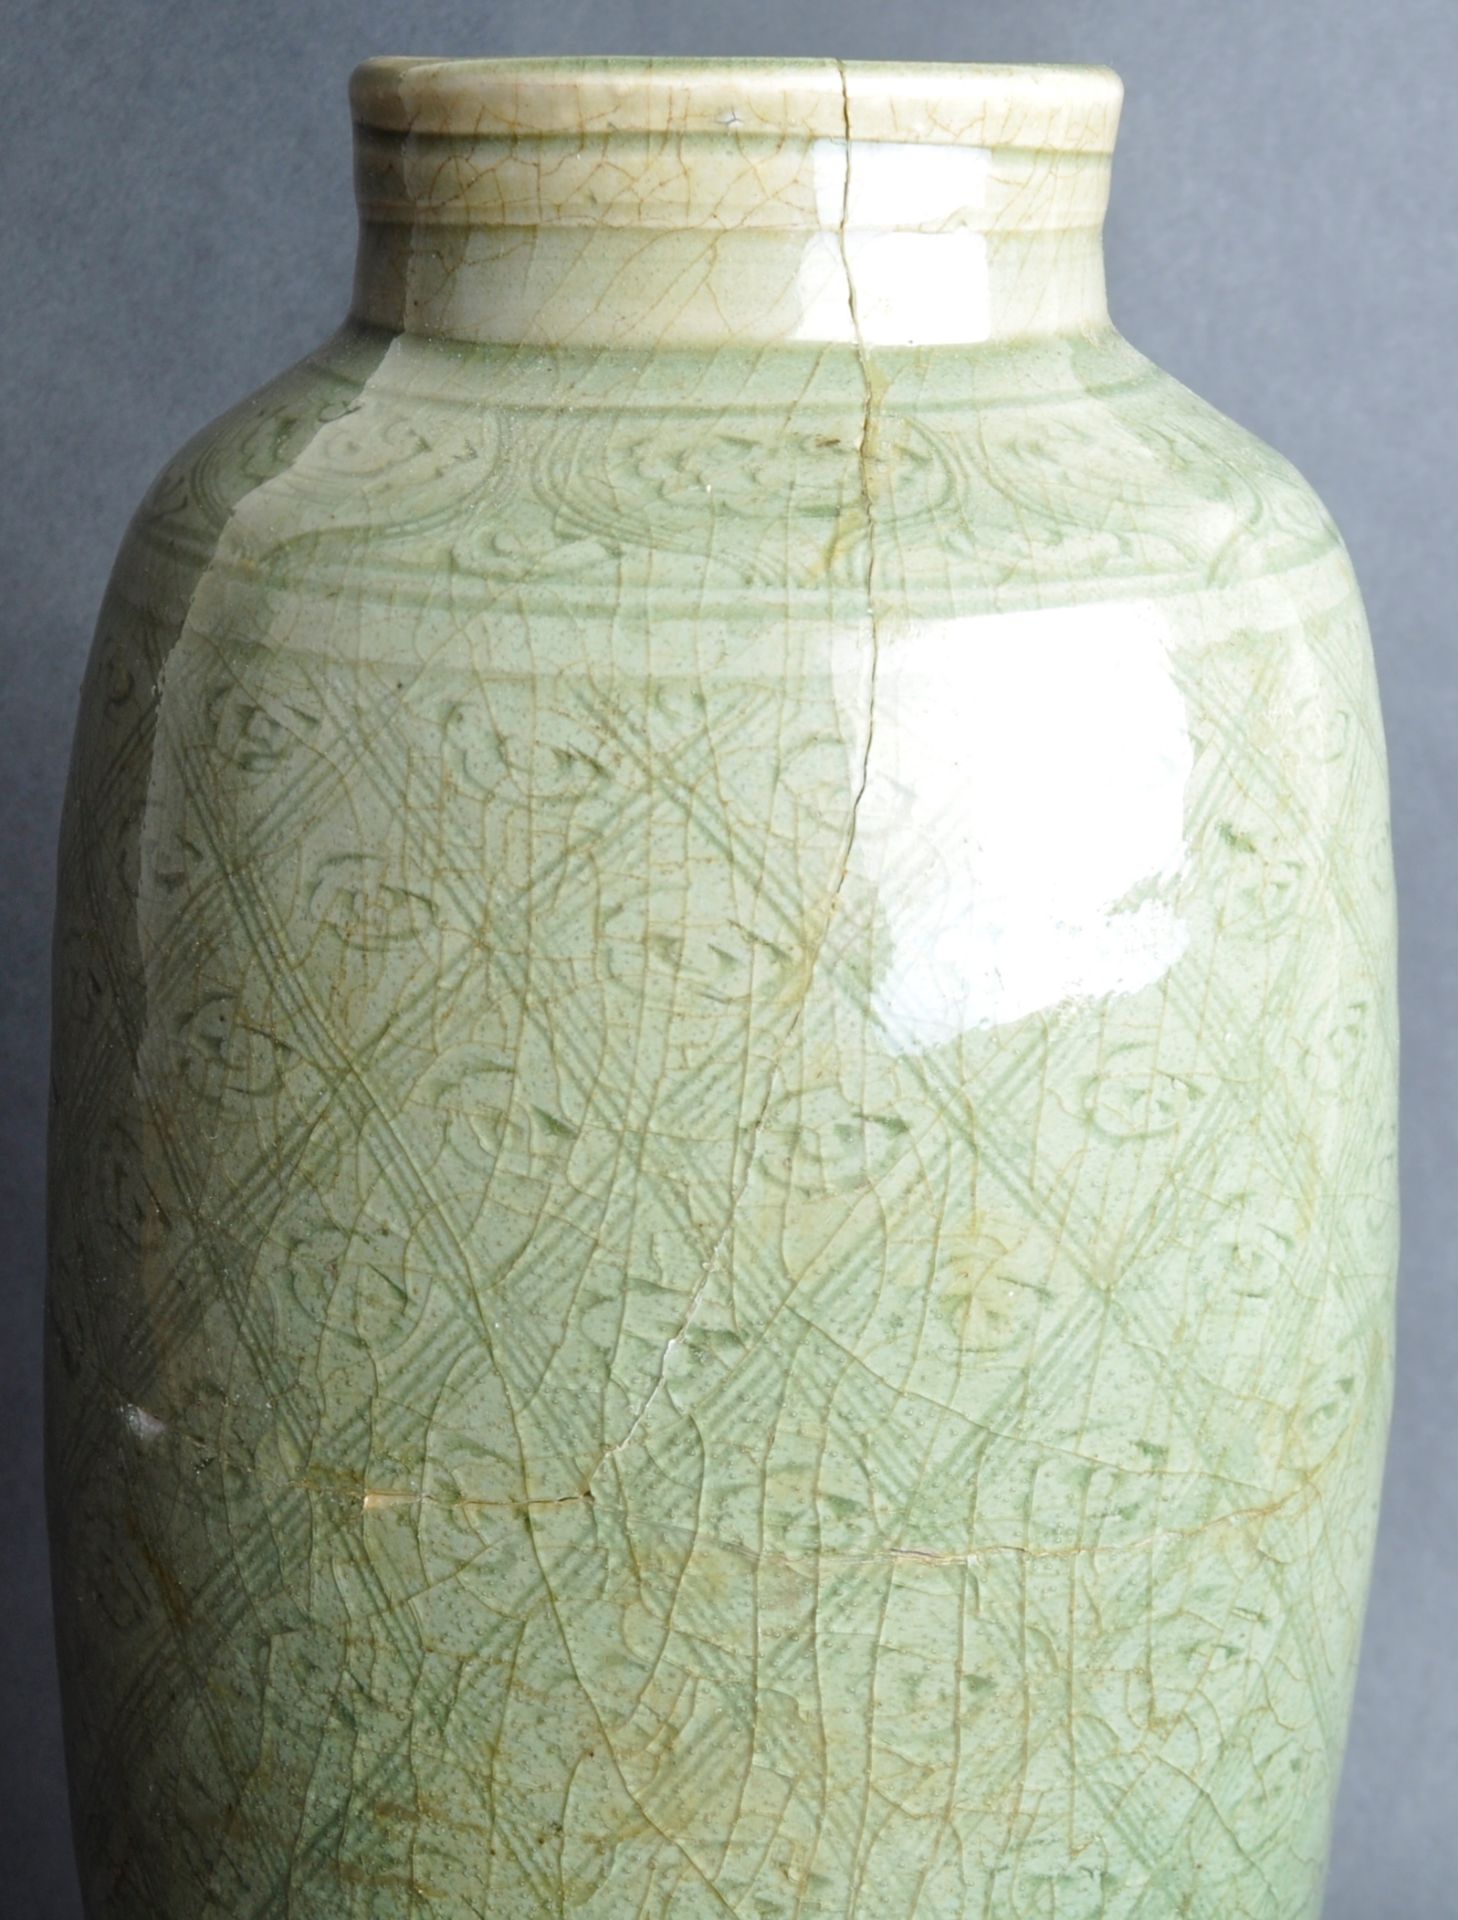 BELIEVED CHINESE MING DYNASTY 17TH CENTURY CELADON VASE - Image 2 of 5